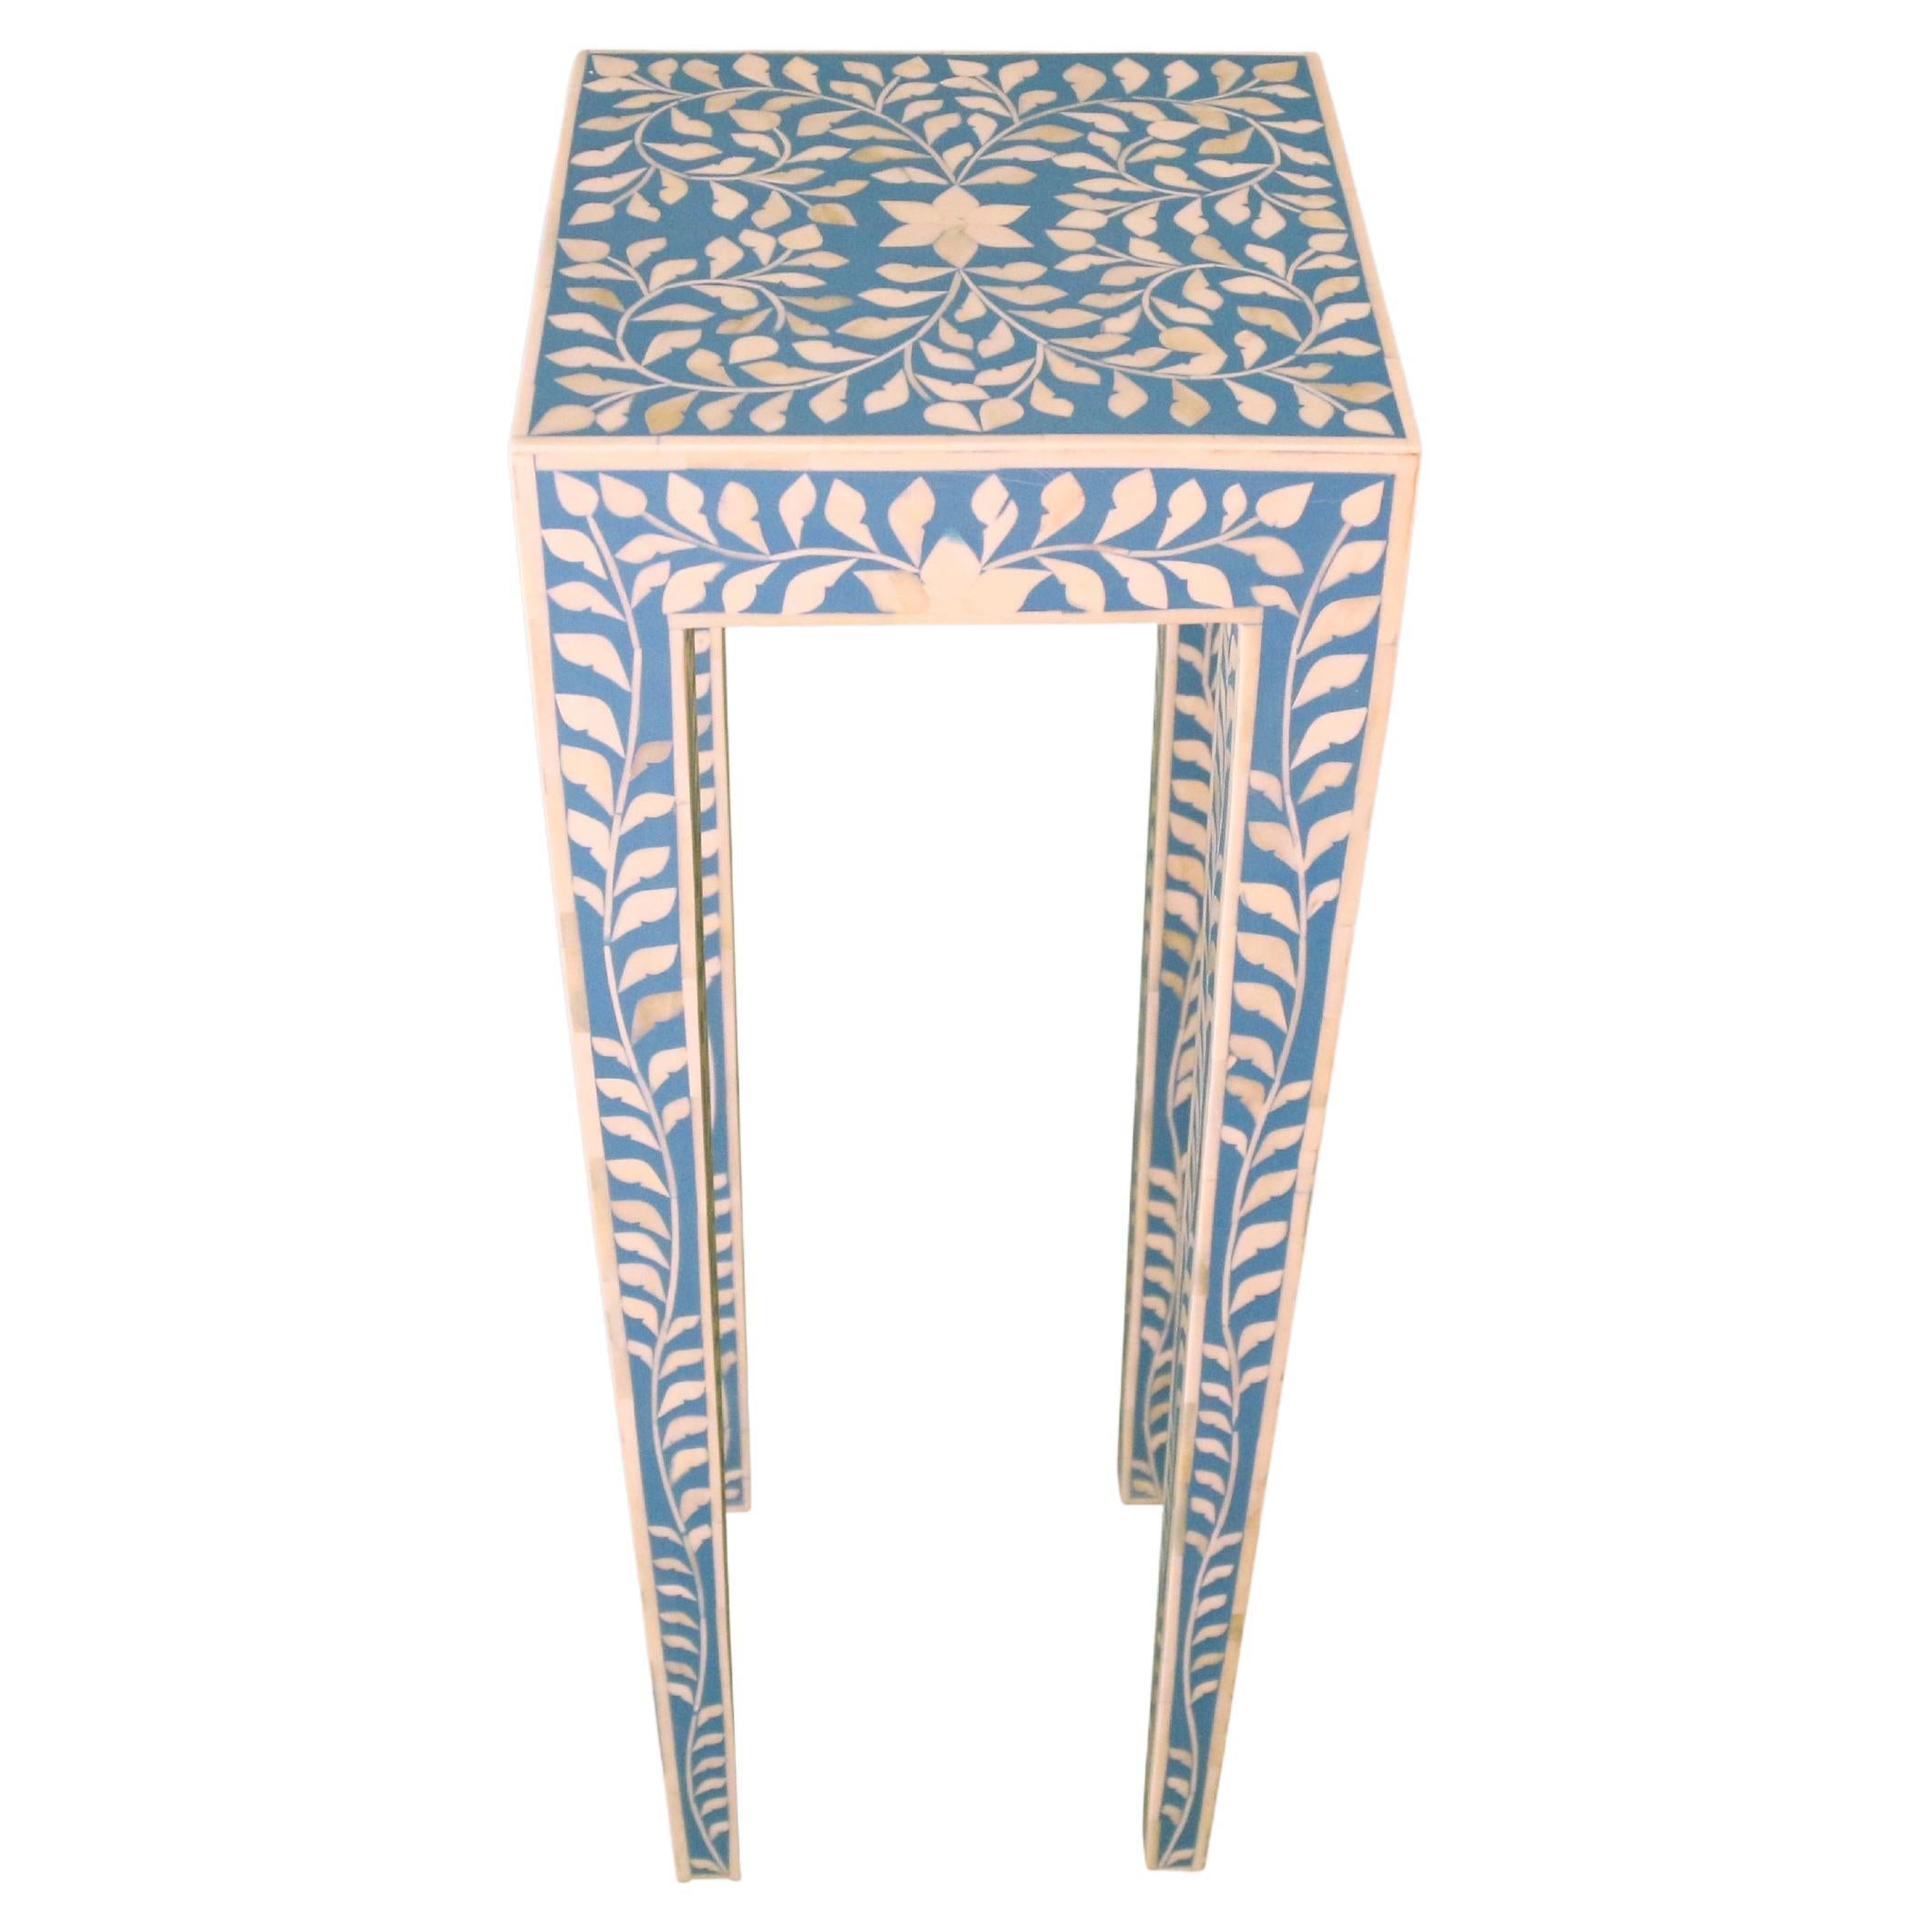 Bone Inlay Side Table in Mellow Azure